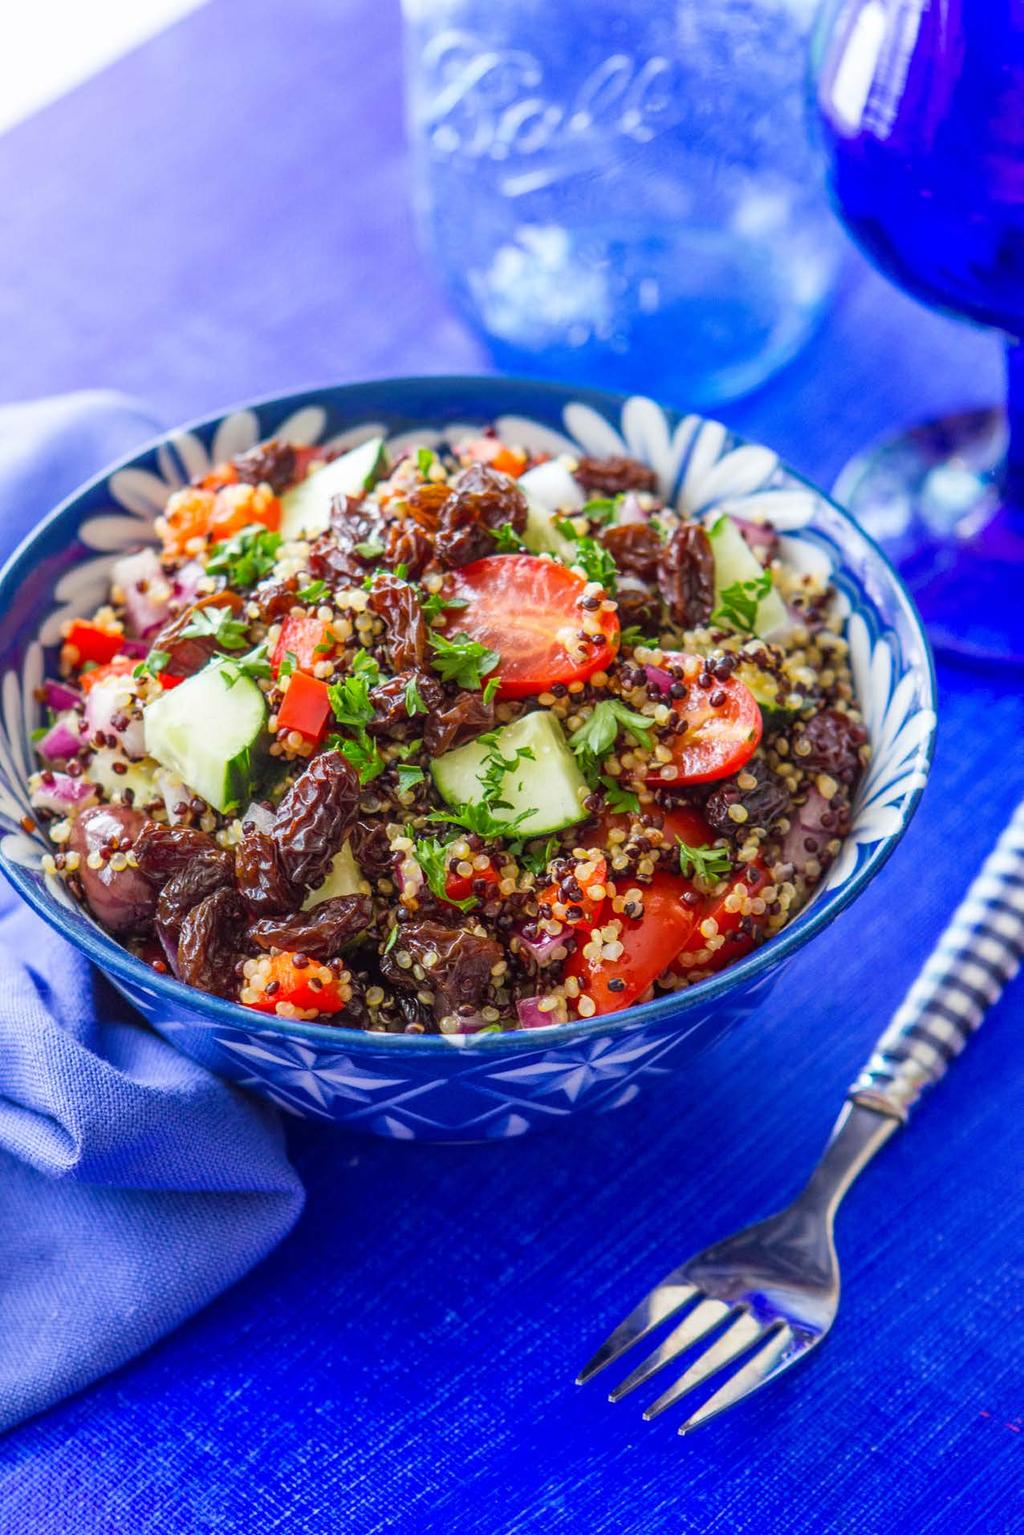 26. Mediterranean Quinoa Bowl This simple salad is reminiscent of tabbouleh. With savory and sweet mixed in, it's a simple high-protein dish. Perfect for lunch or dinner.